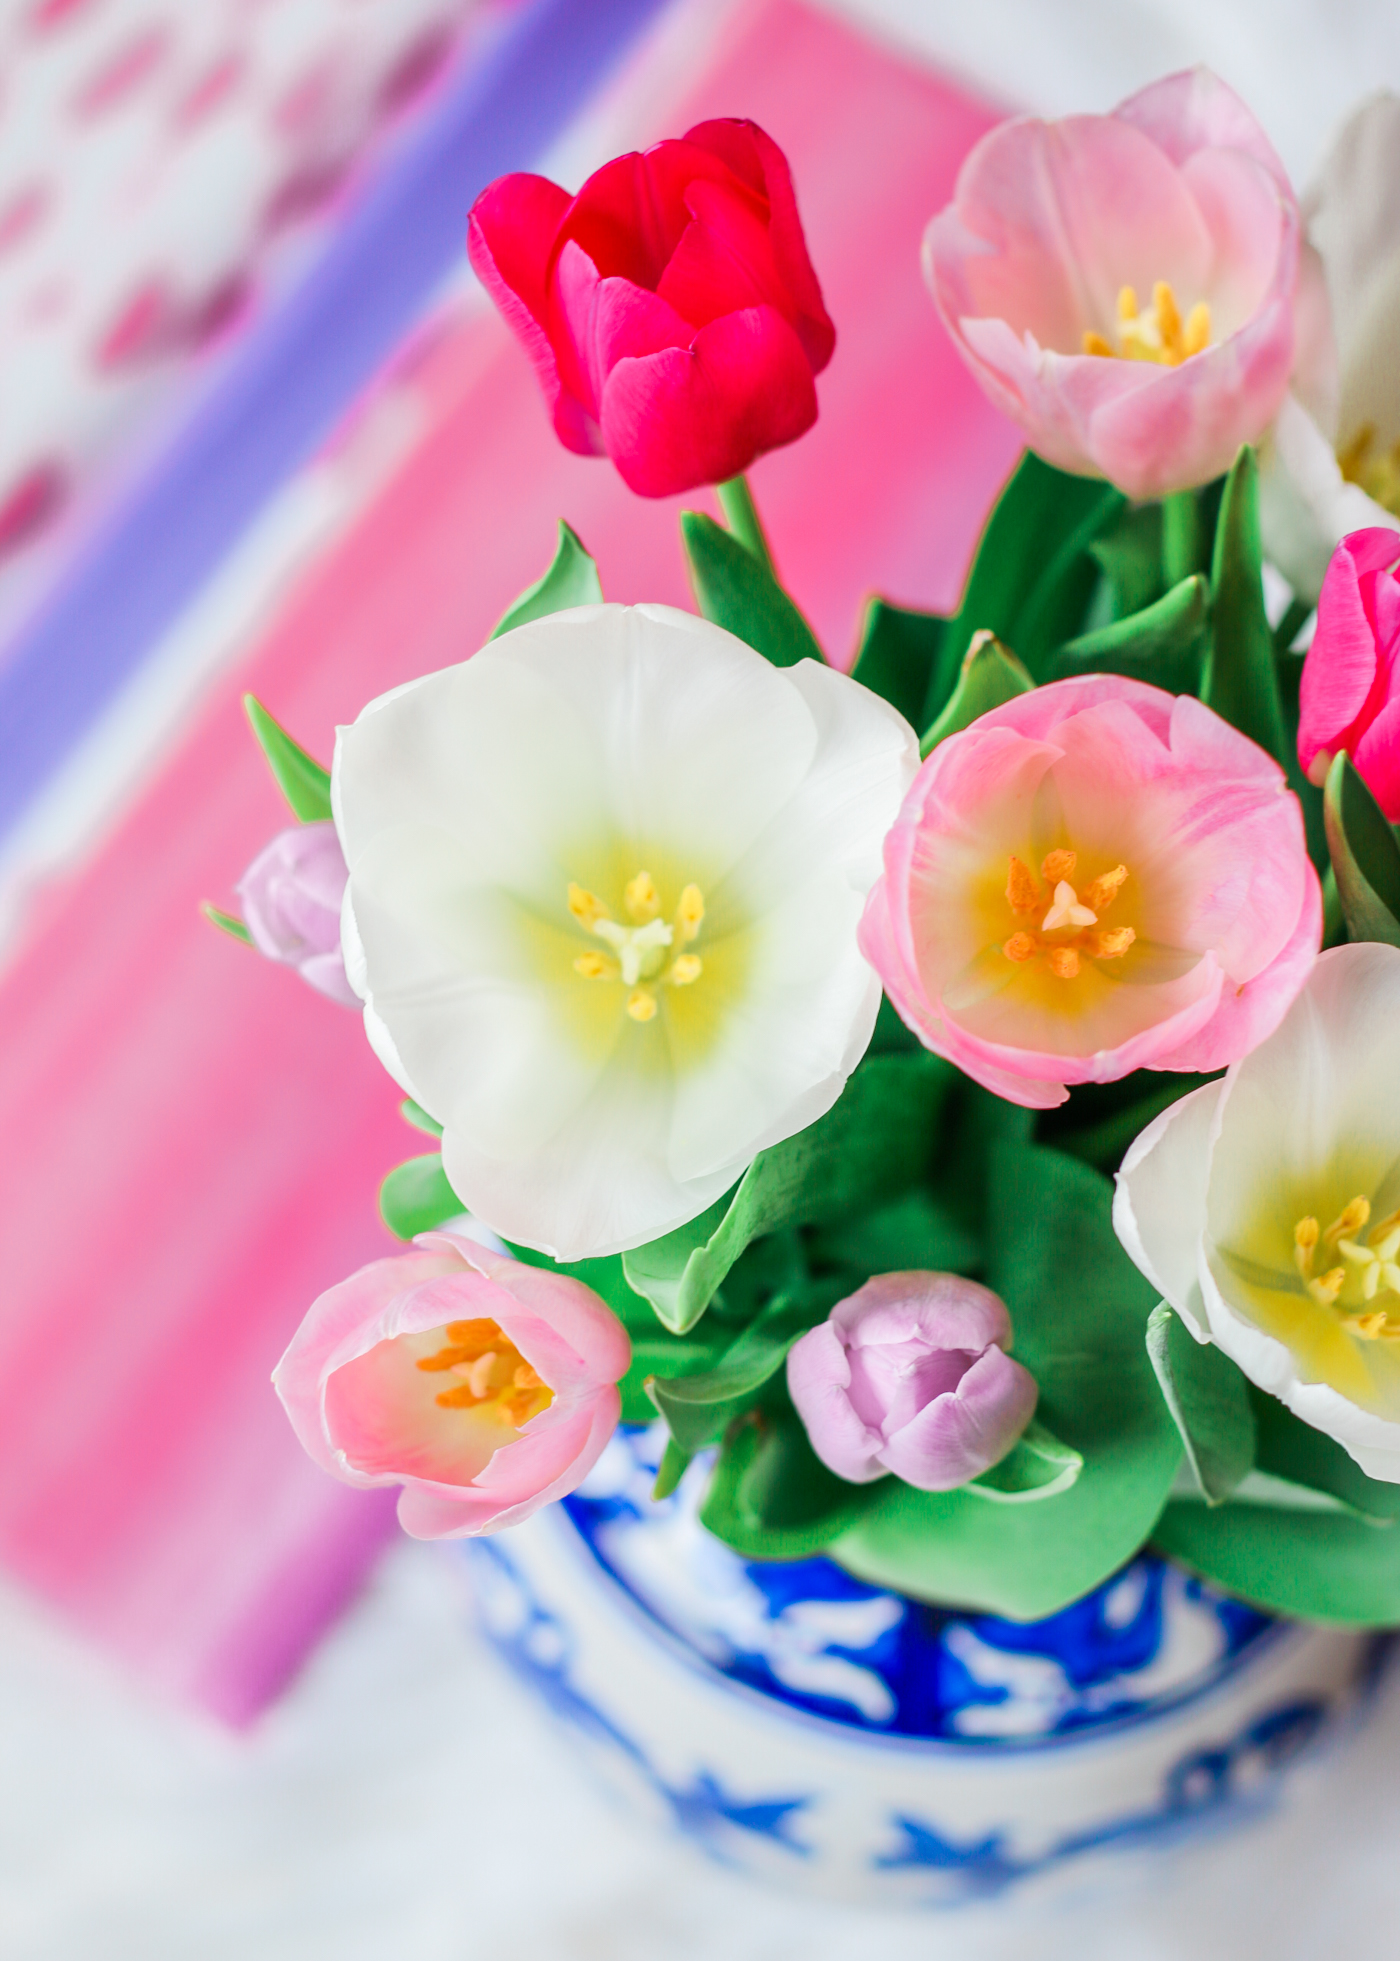 Country Spring Decor: DIY Mini Spring Tulip Bouquets by southern lifestyle blogger Stephanie Ziajka from Diary of a Debutante, spring tulip bouquet, easter tulip bouquet, pretty watercolor tissue paper